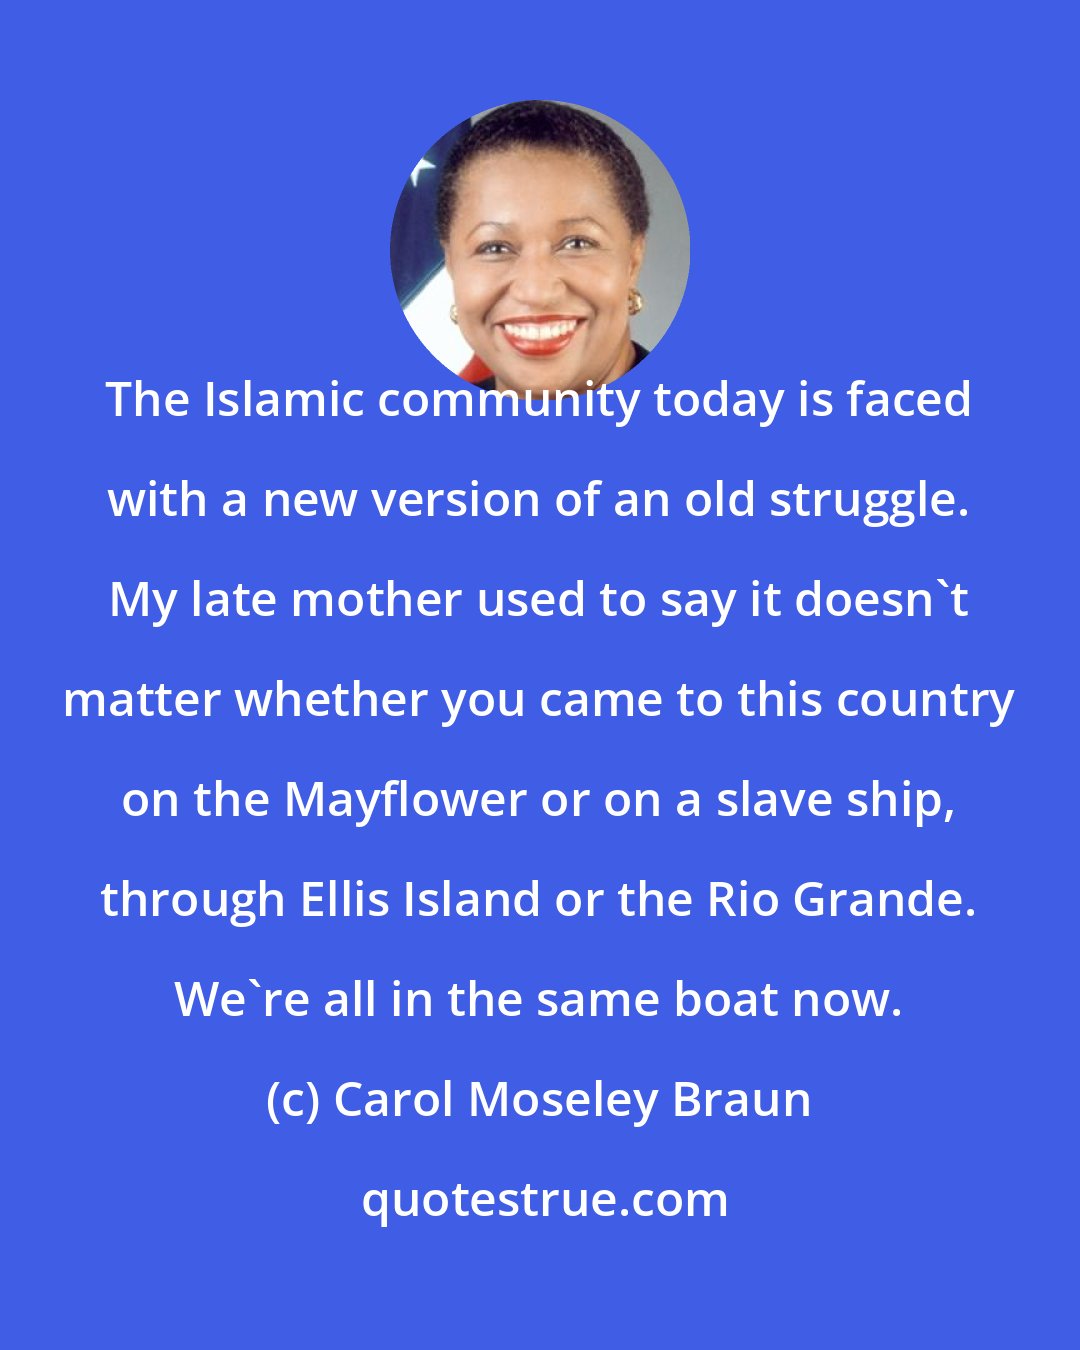 Carol Moseley Braun: The Islamic community today is faced with a new version of an old struggle. My late mother used to say it doesn't matter whether you came to this country on the Mayflower or on a slave ship, through Ellis Island or the Rio Grande. We're all in the same boat now.